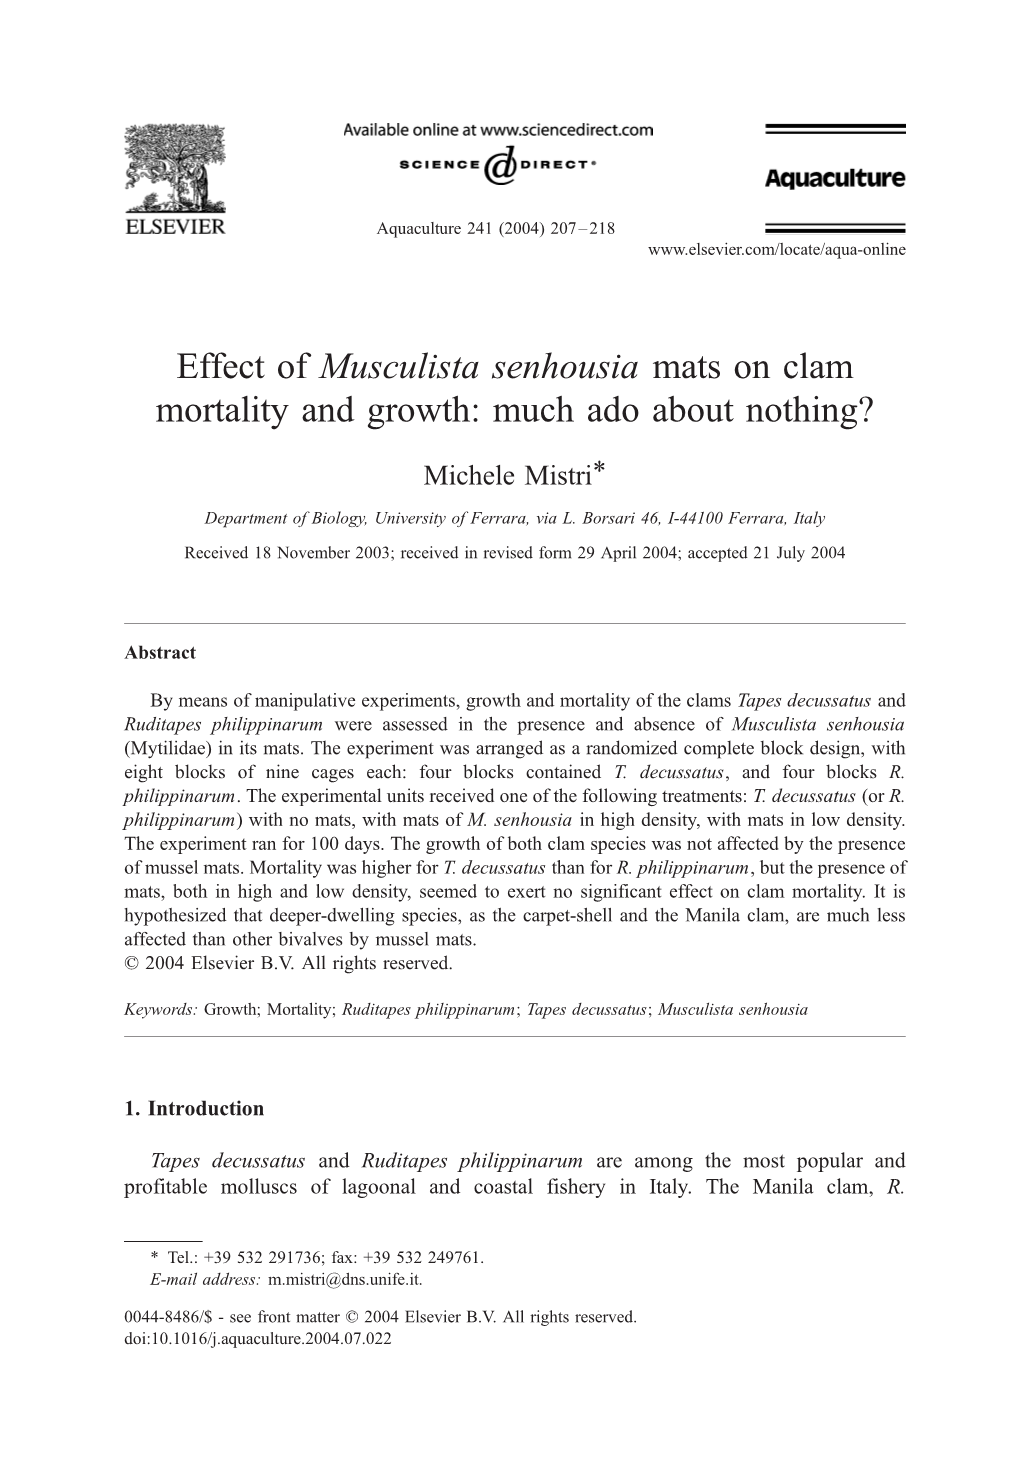 Effect of Musculista Senhousia Mats on Clam Mortality and Growth: Much Ado About Nothing?